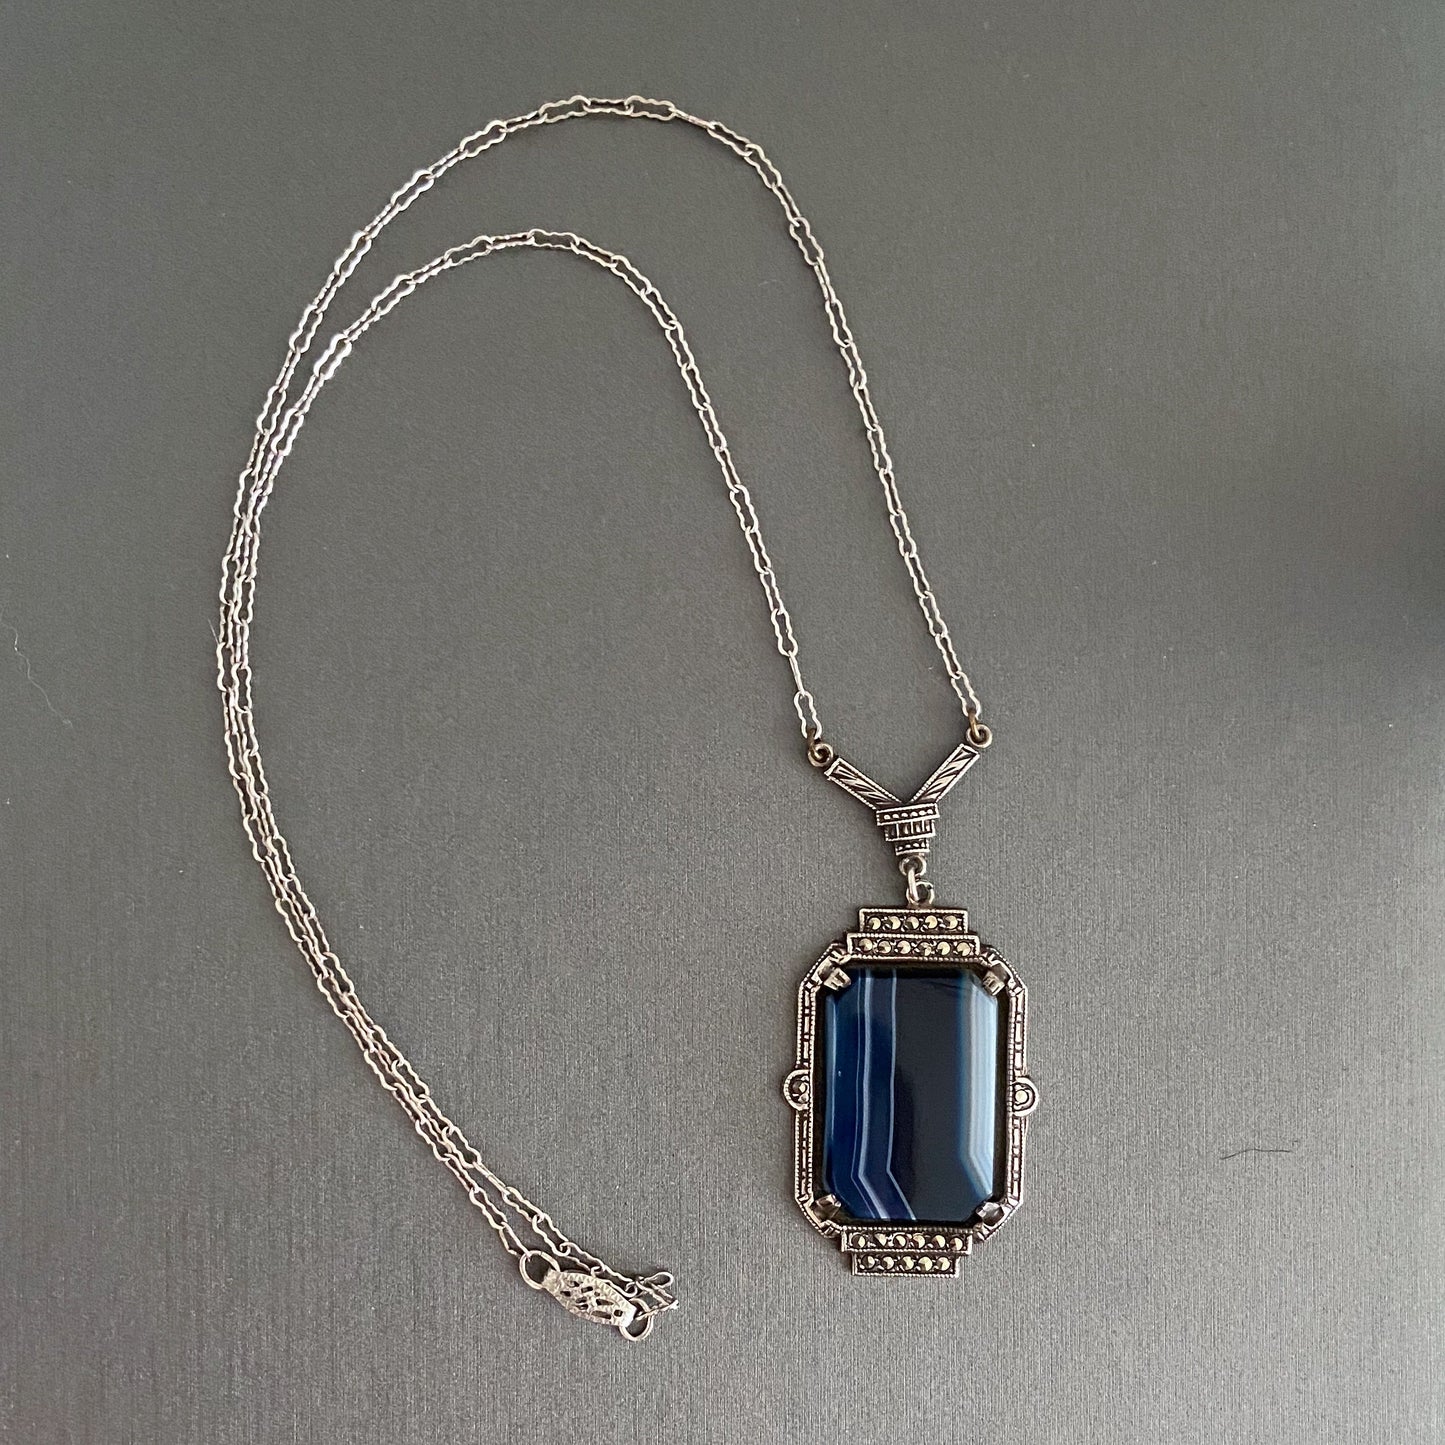 SOLD--Art Deco Marcasite and Blue Agate Necklace Sterling c. 1930